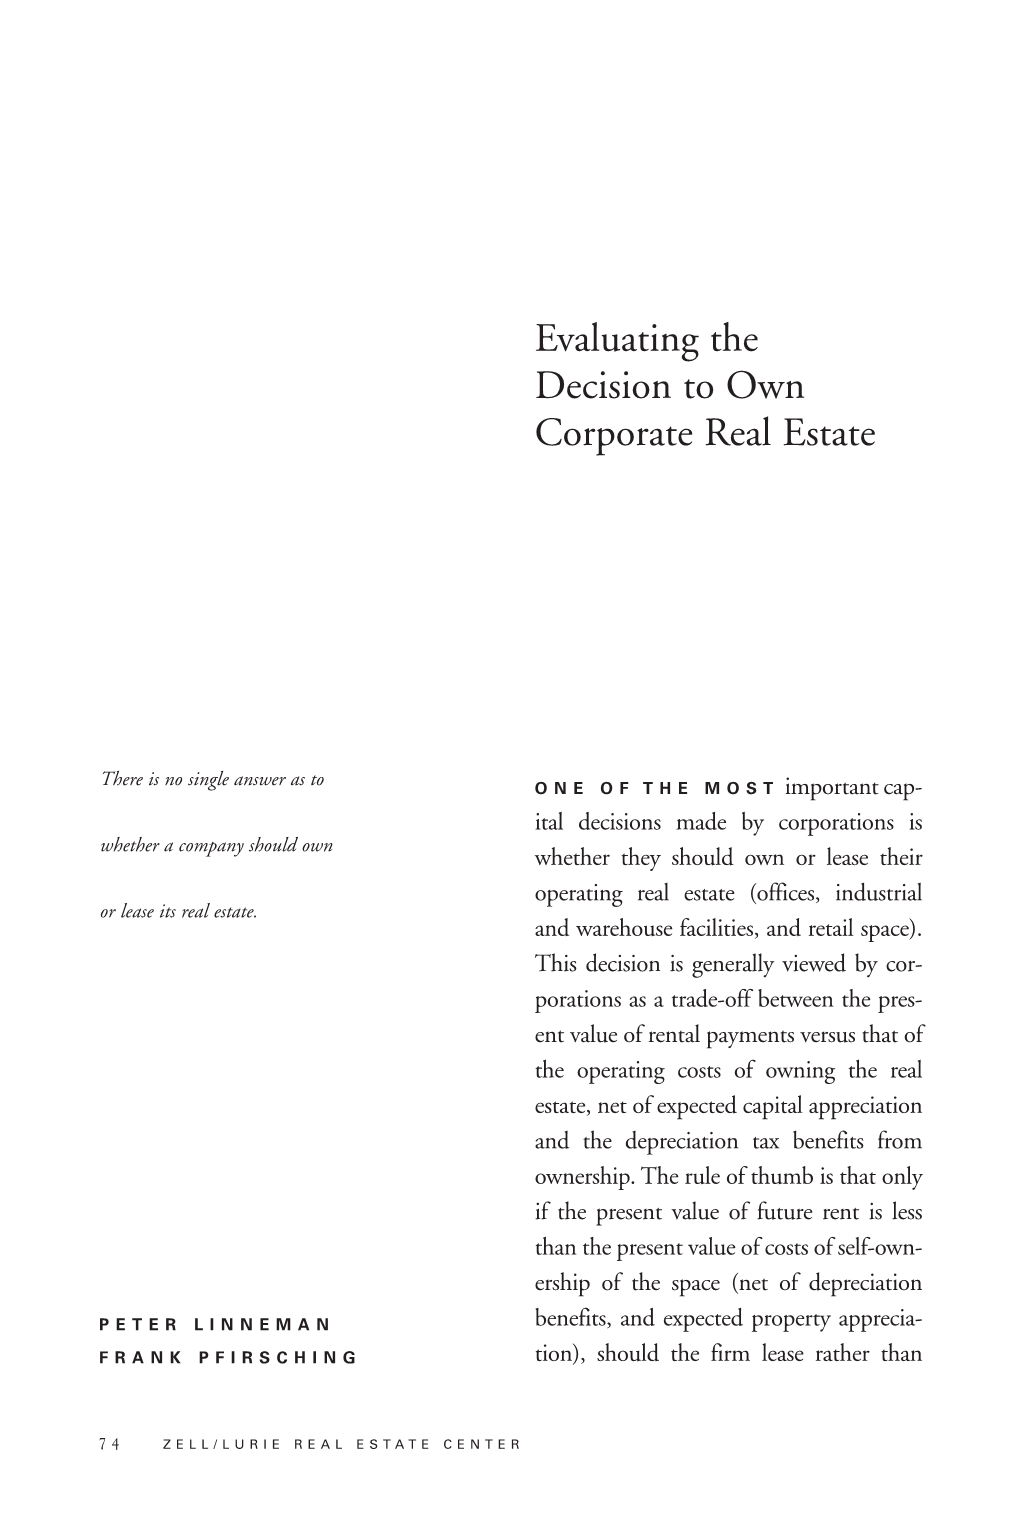 Evaluating the Decision to Own Corporate Real Estate